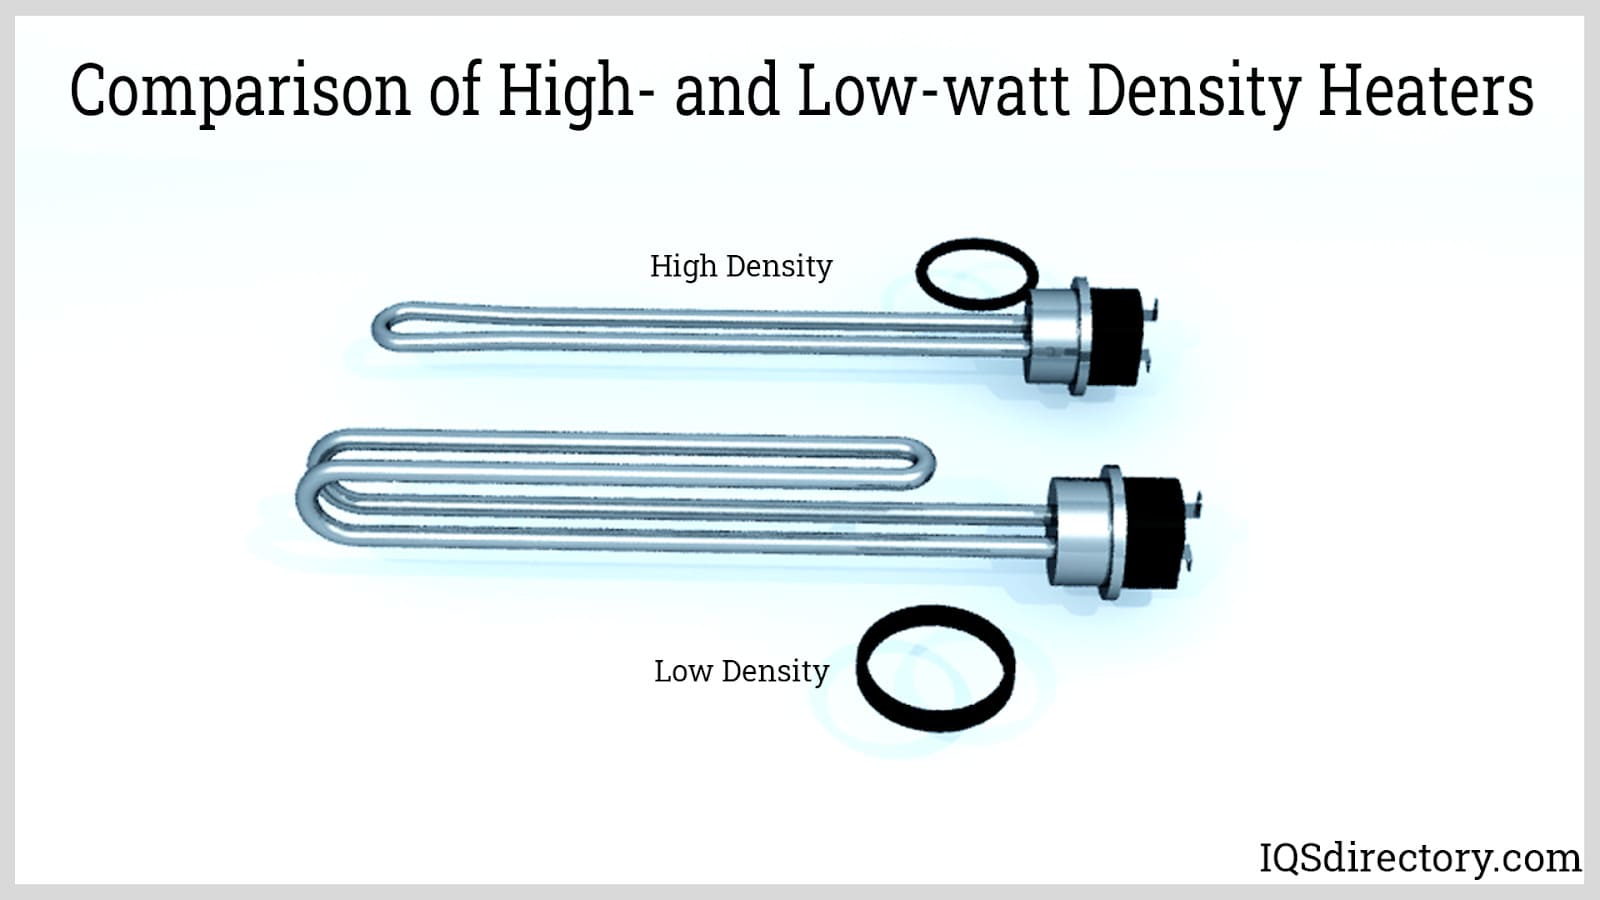 Comparison of High- and Low-watt Density Heaters